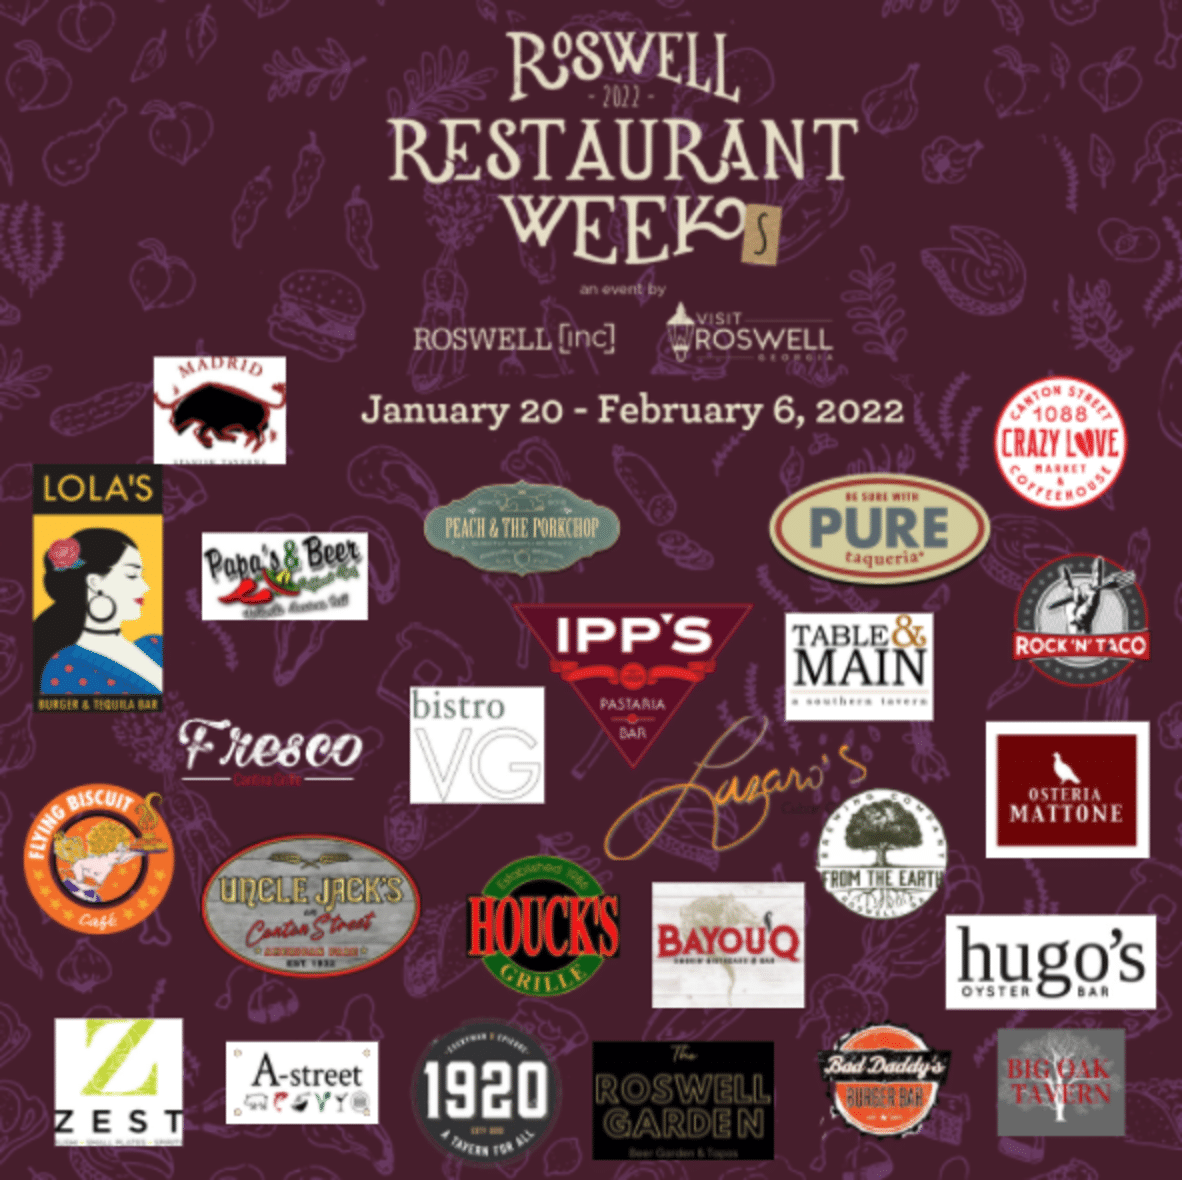 Roswell Restaurant Weeks to begin January 20